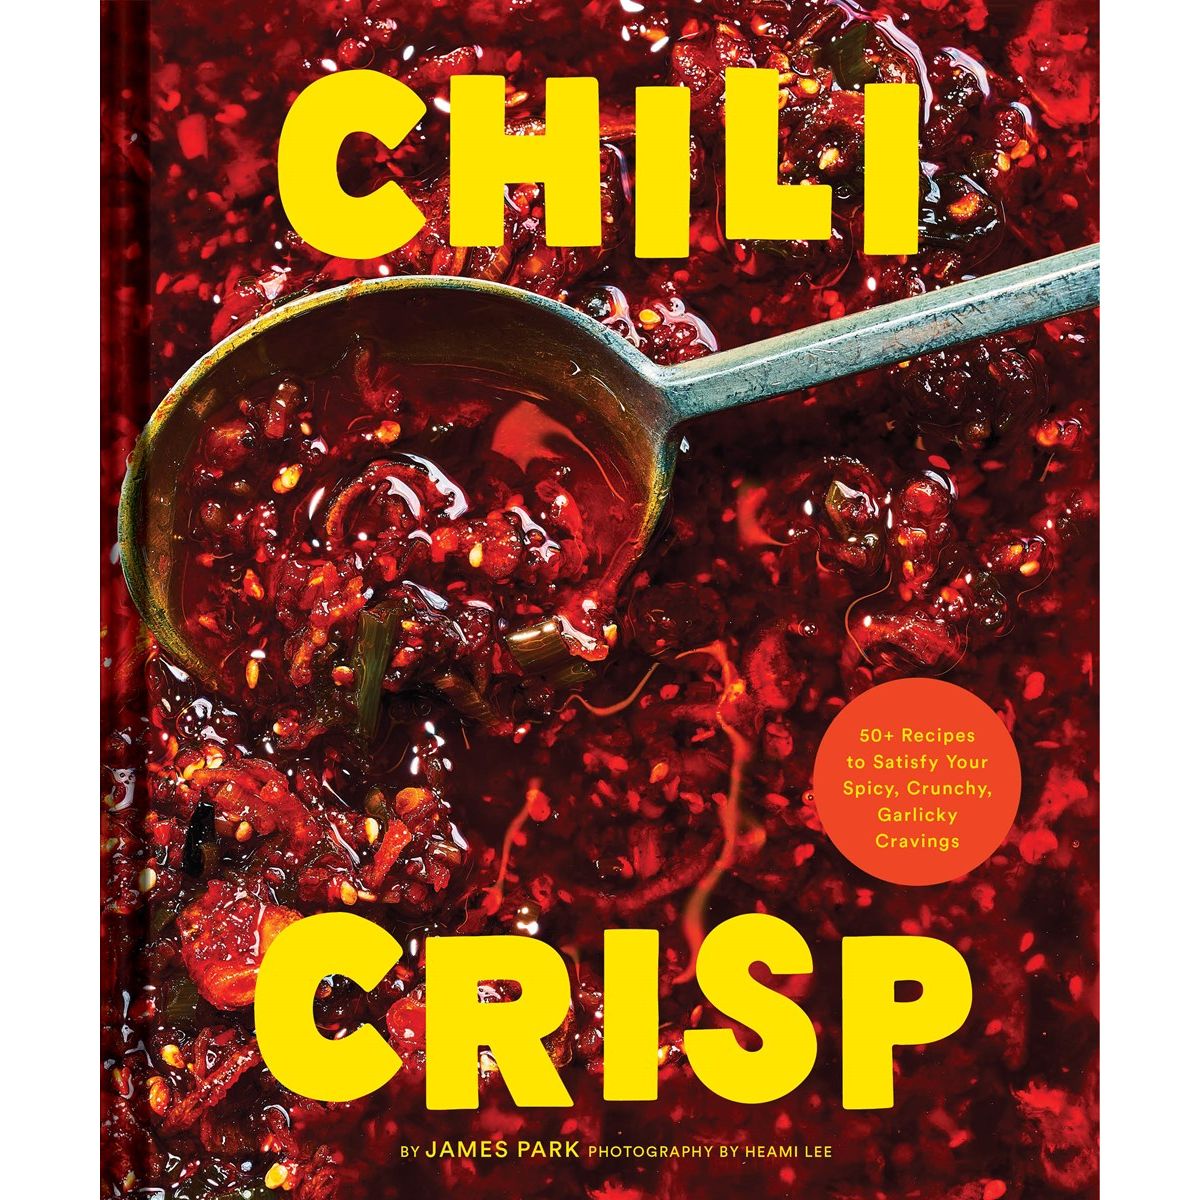 Chili Crisp : 50+ Recipes to Satisfy Your Spicy, Crunchy, Garlicky Cravings (James Park)